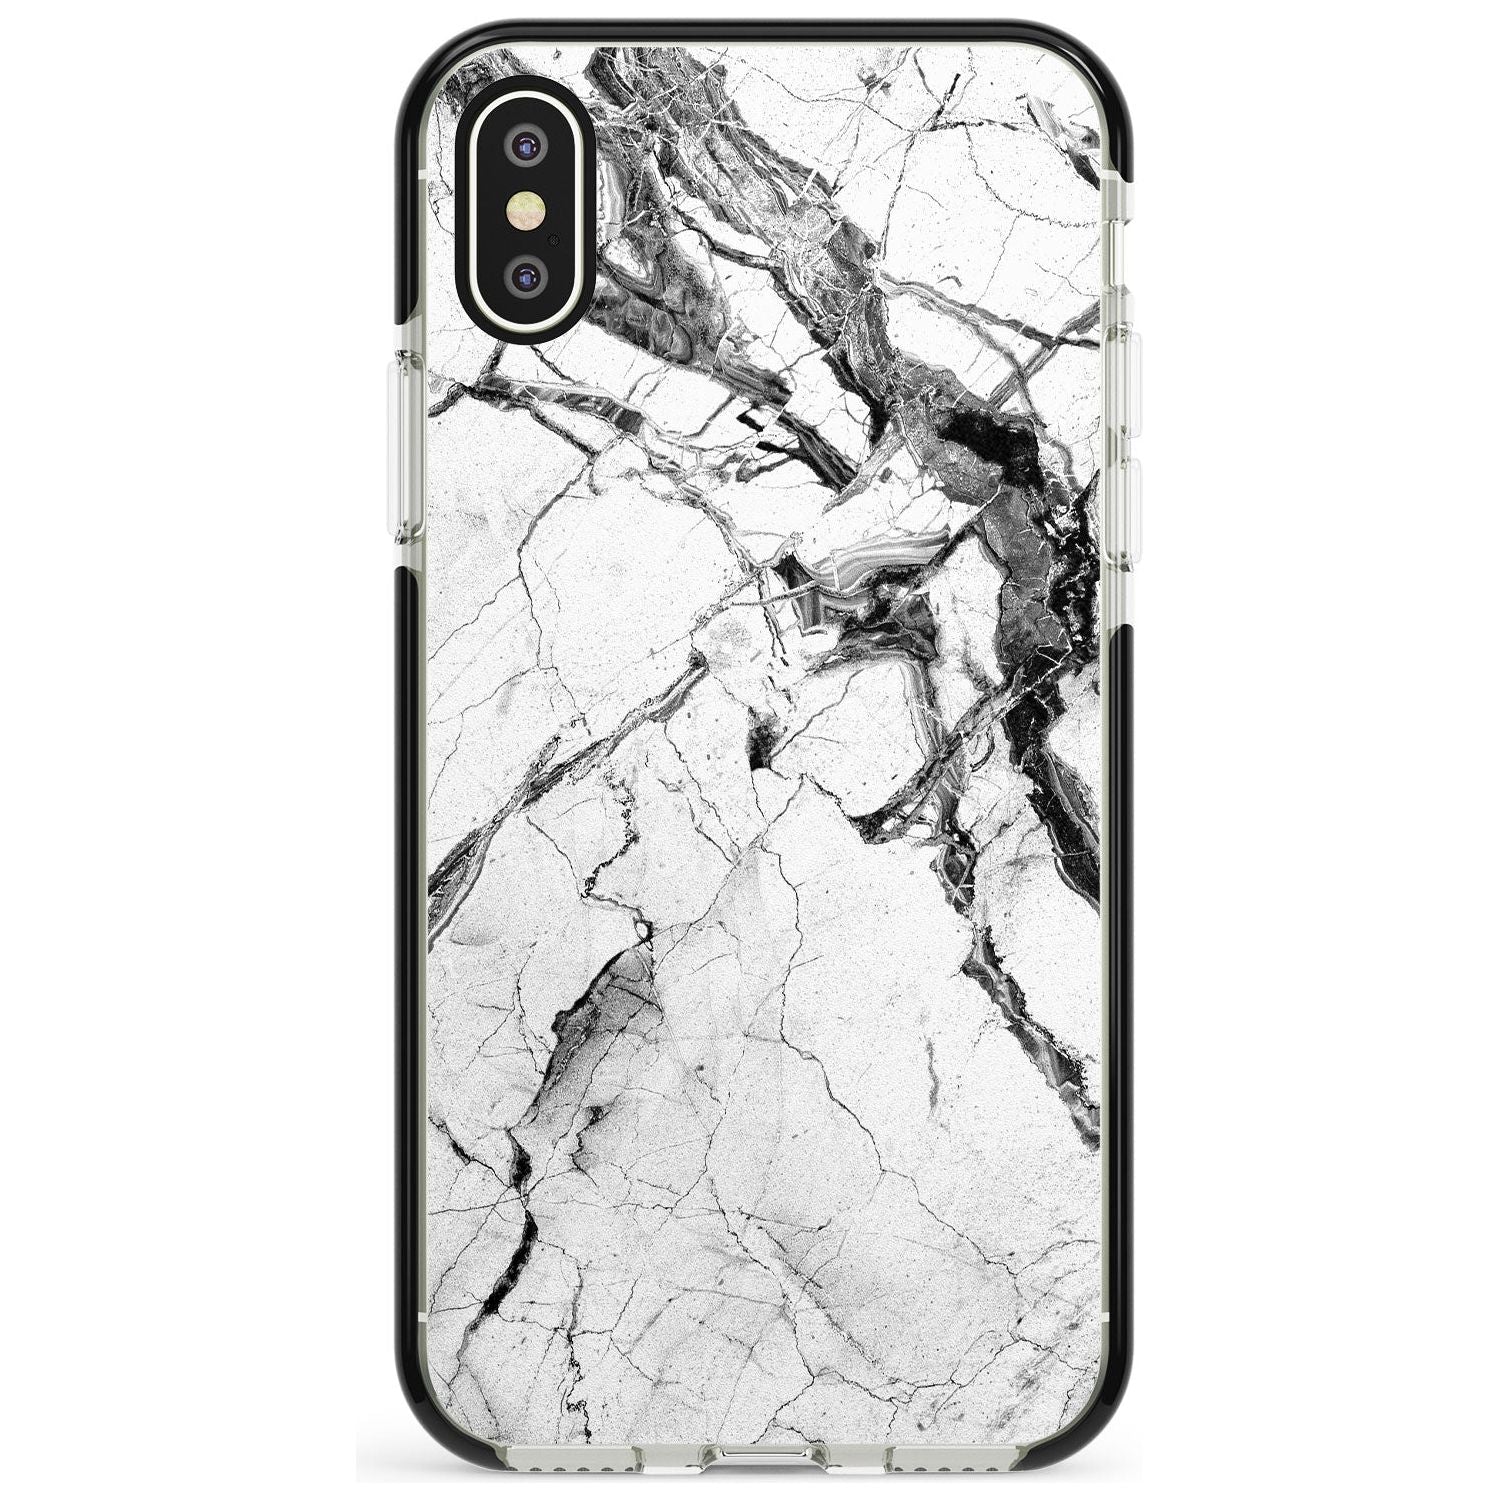 Black & White Stormy Marble Black Impact Phone Case for iPhone X XS Max XR